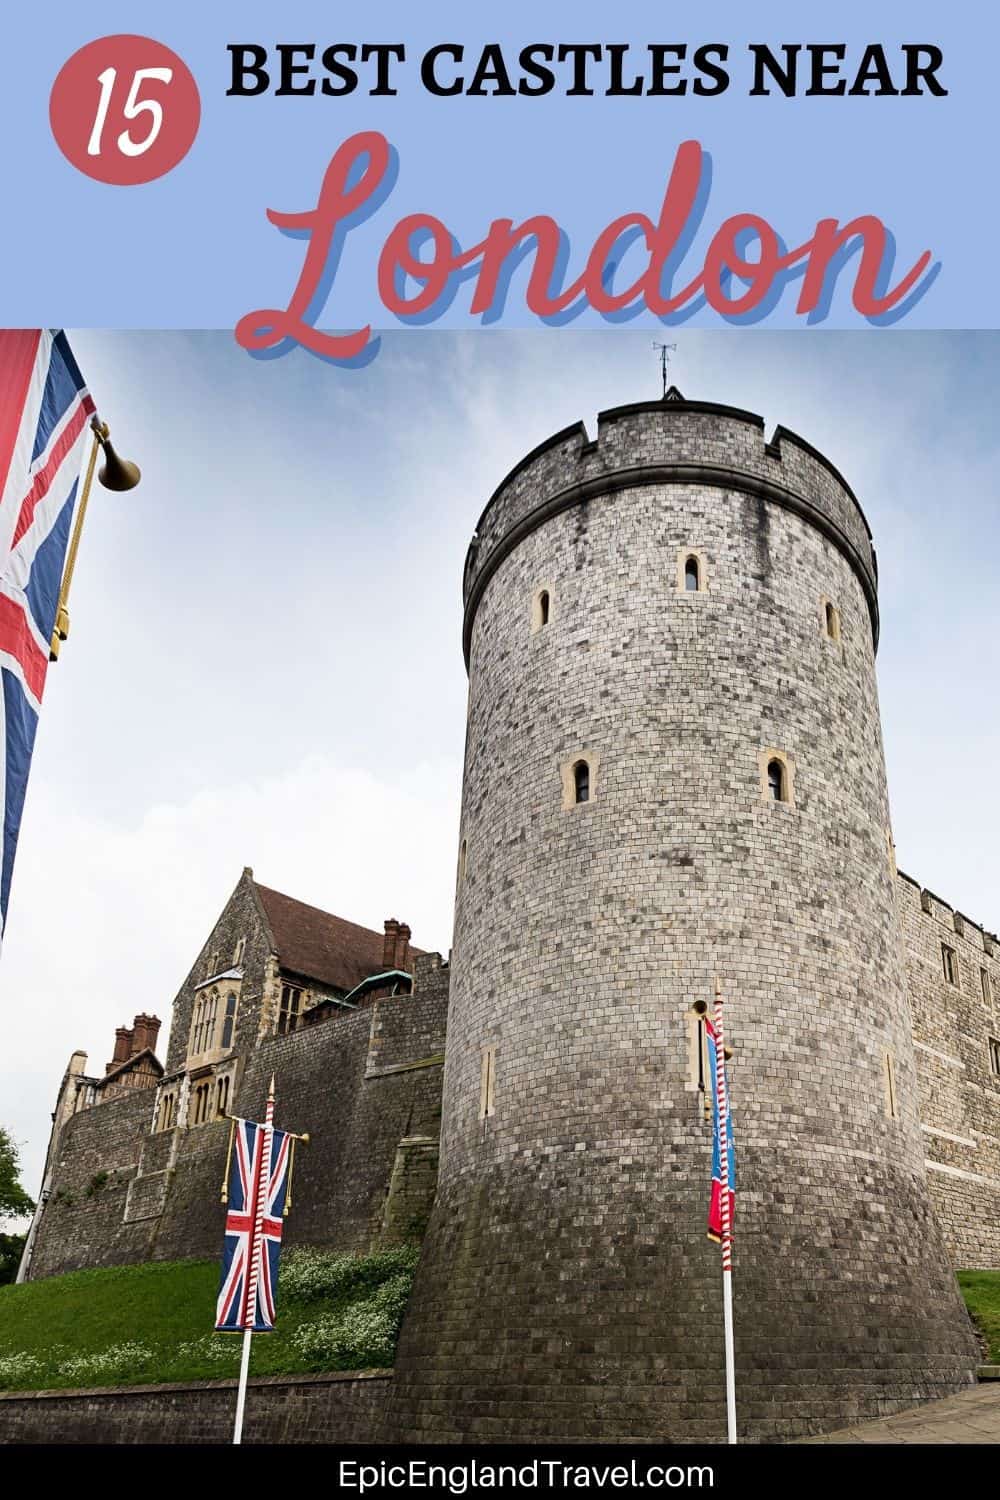 Pinterest image of Windsor Castle with the text reading: "15 Best Castles Near London"